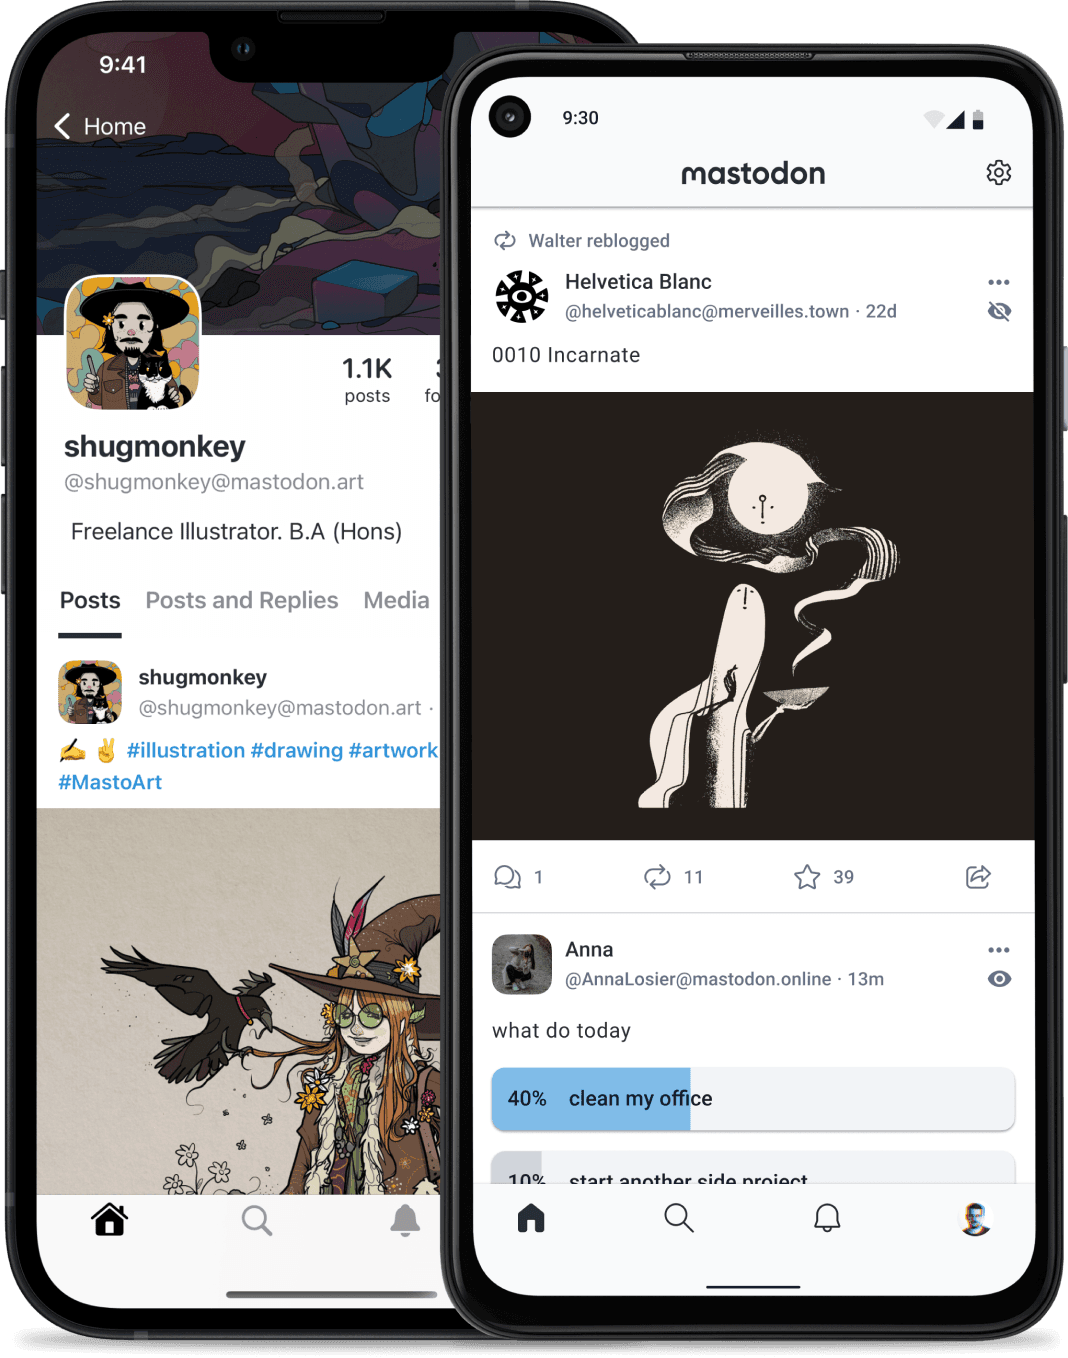 Screenshots of Mastodon on iOS and Android, showing an artist's profile, reblogging, and a poll